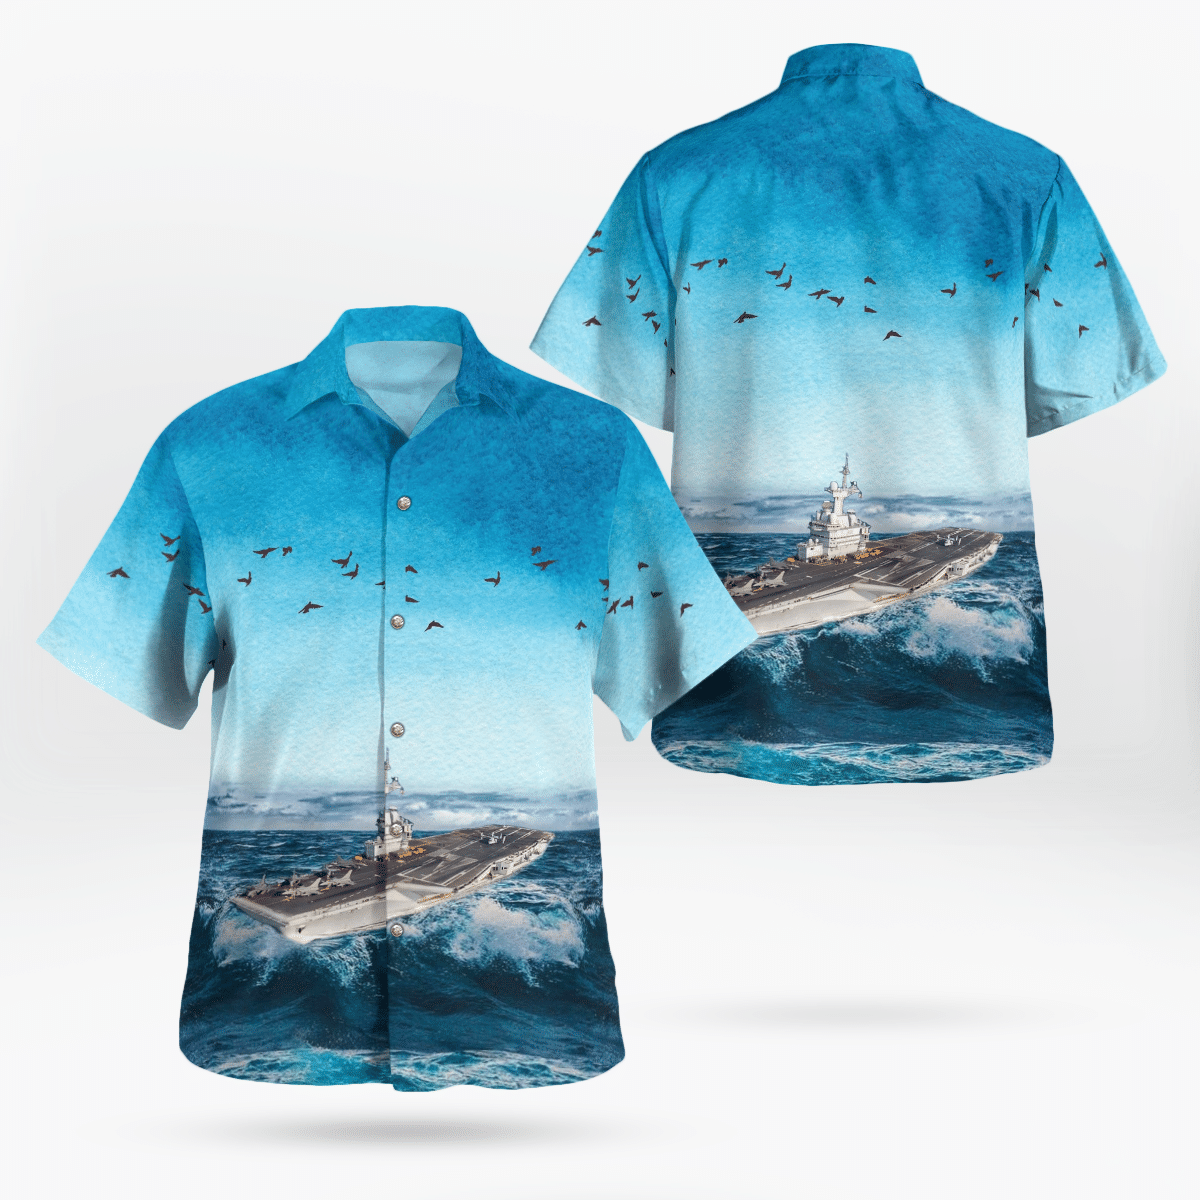 Some cool 3d hawaii shirt for this summer 12